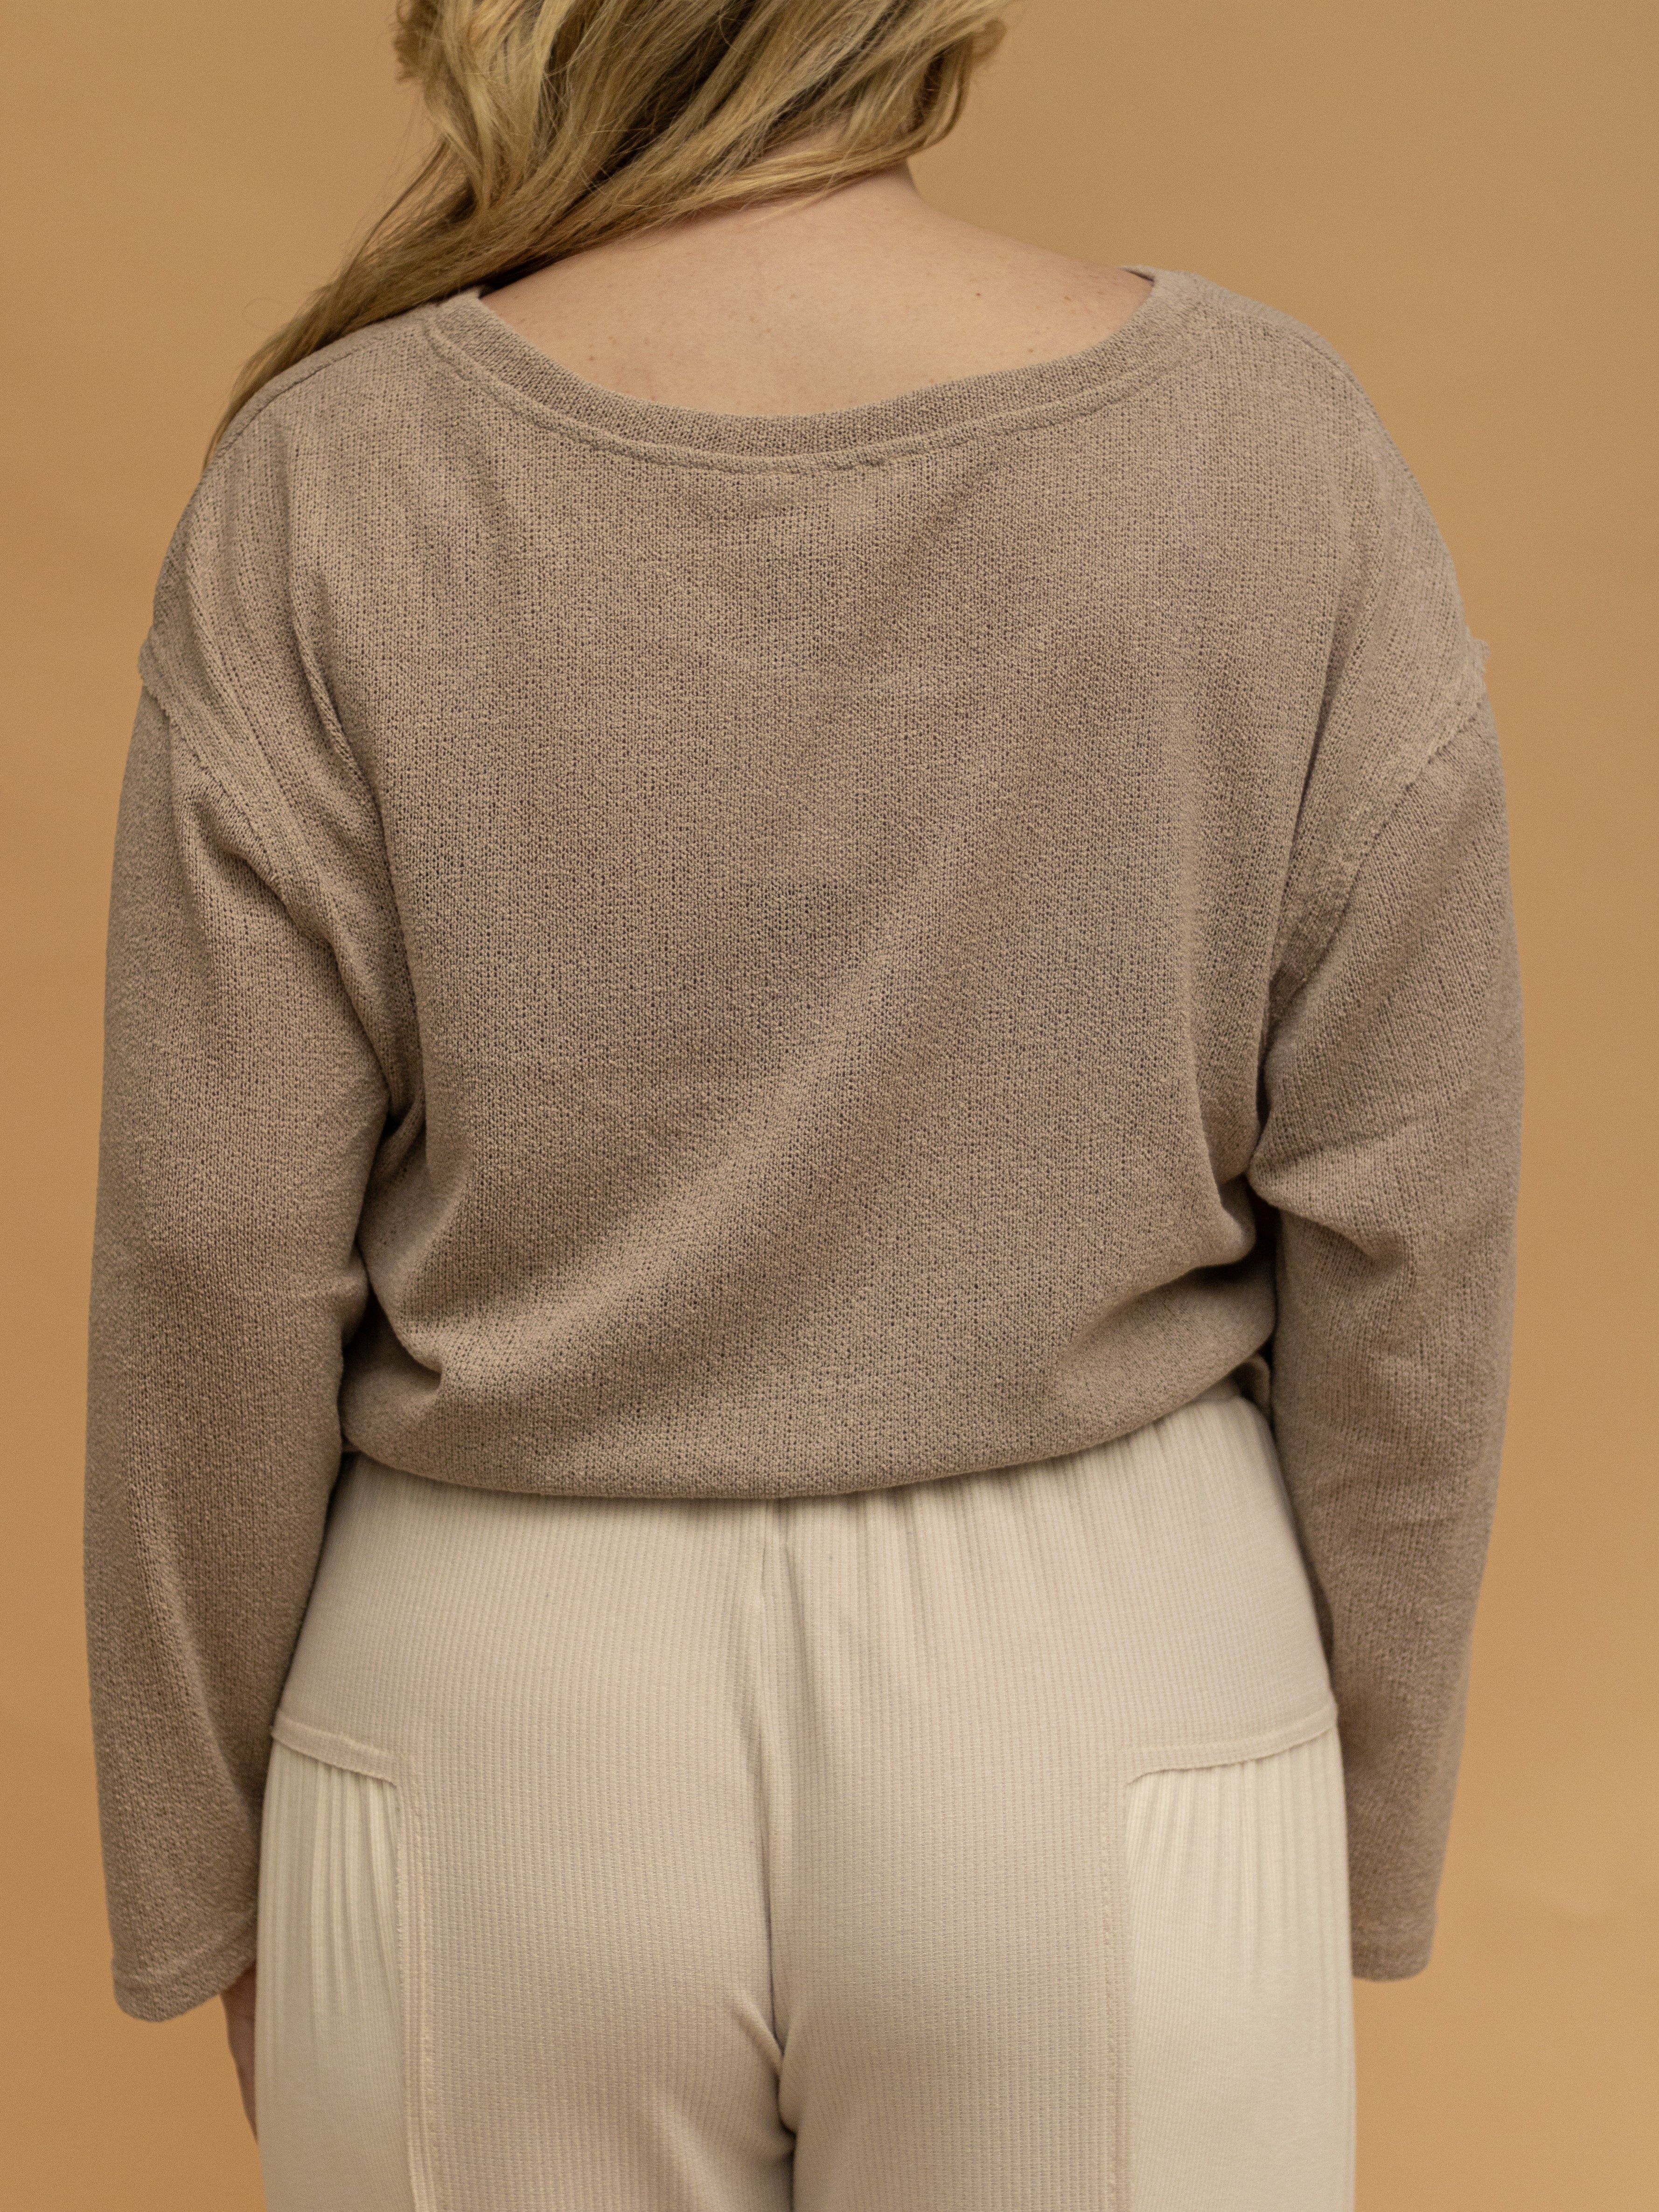 Vacay Time Lightweight Sweater Top - Beige